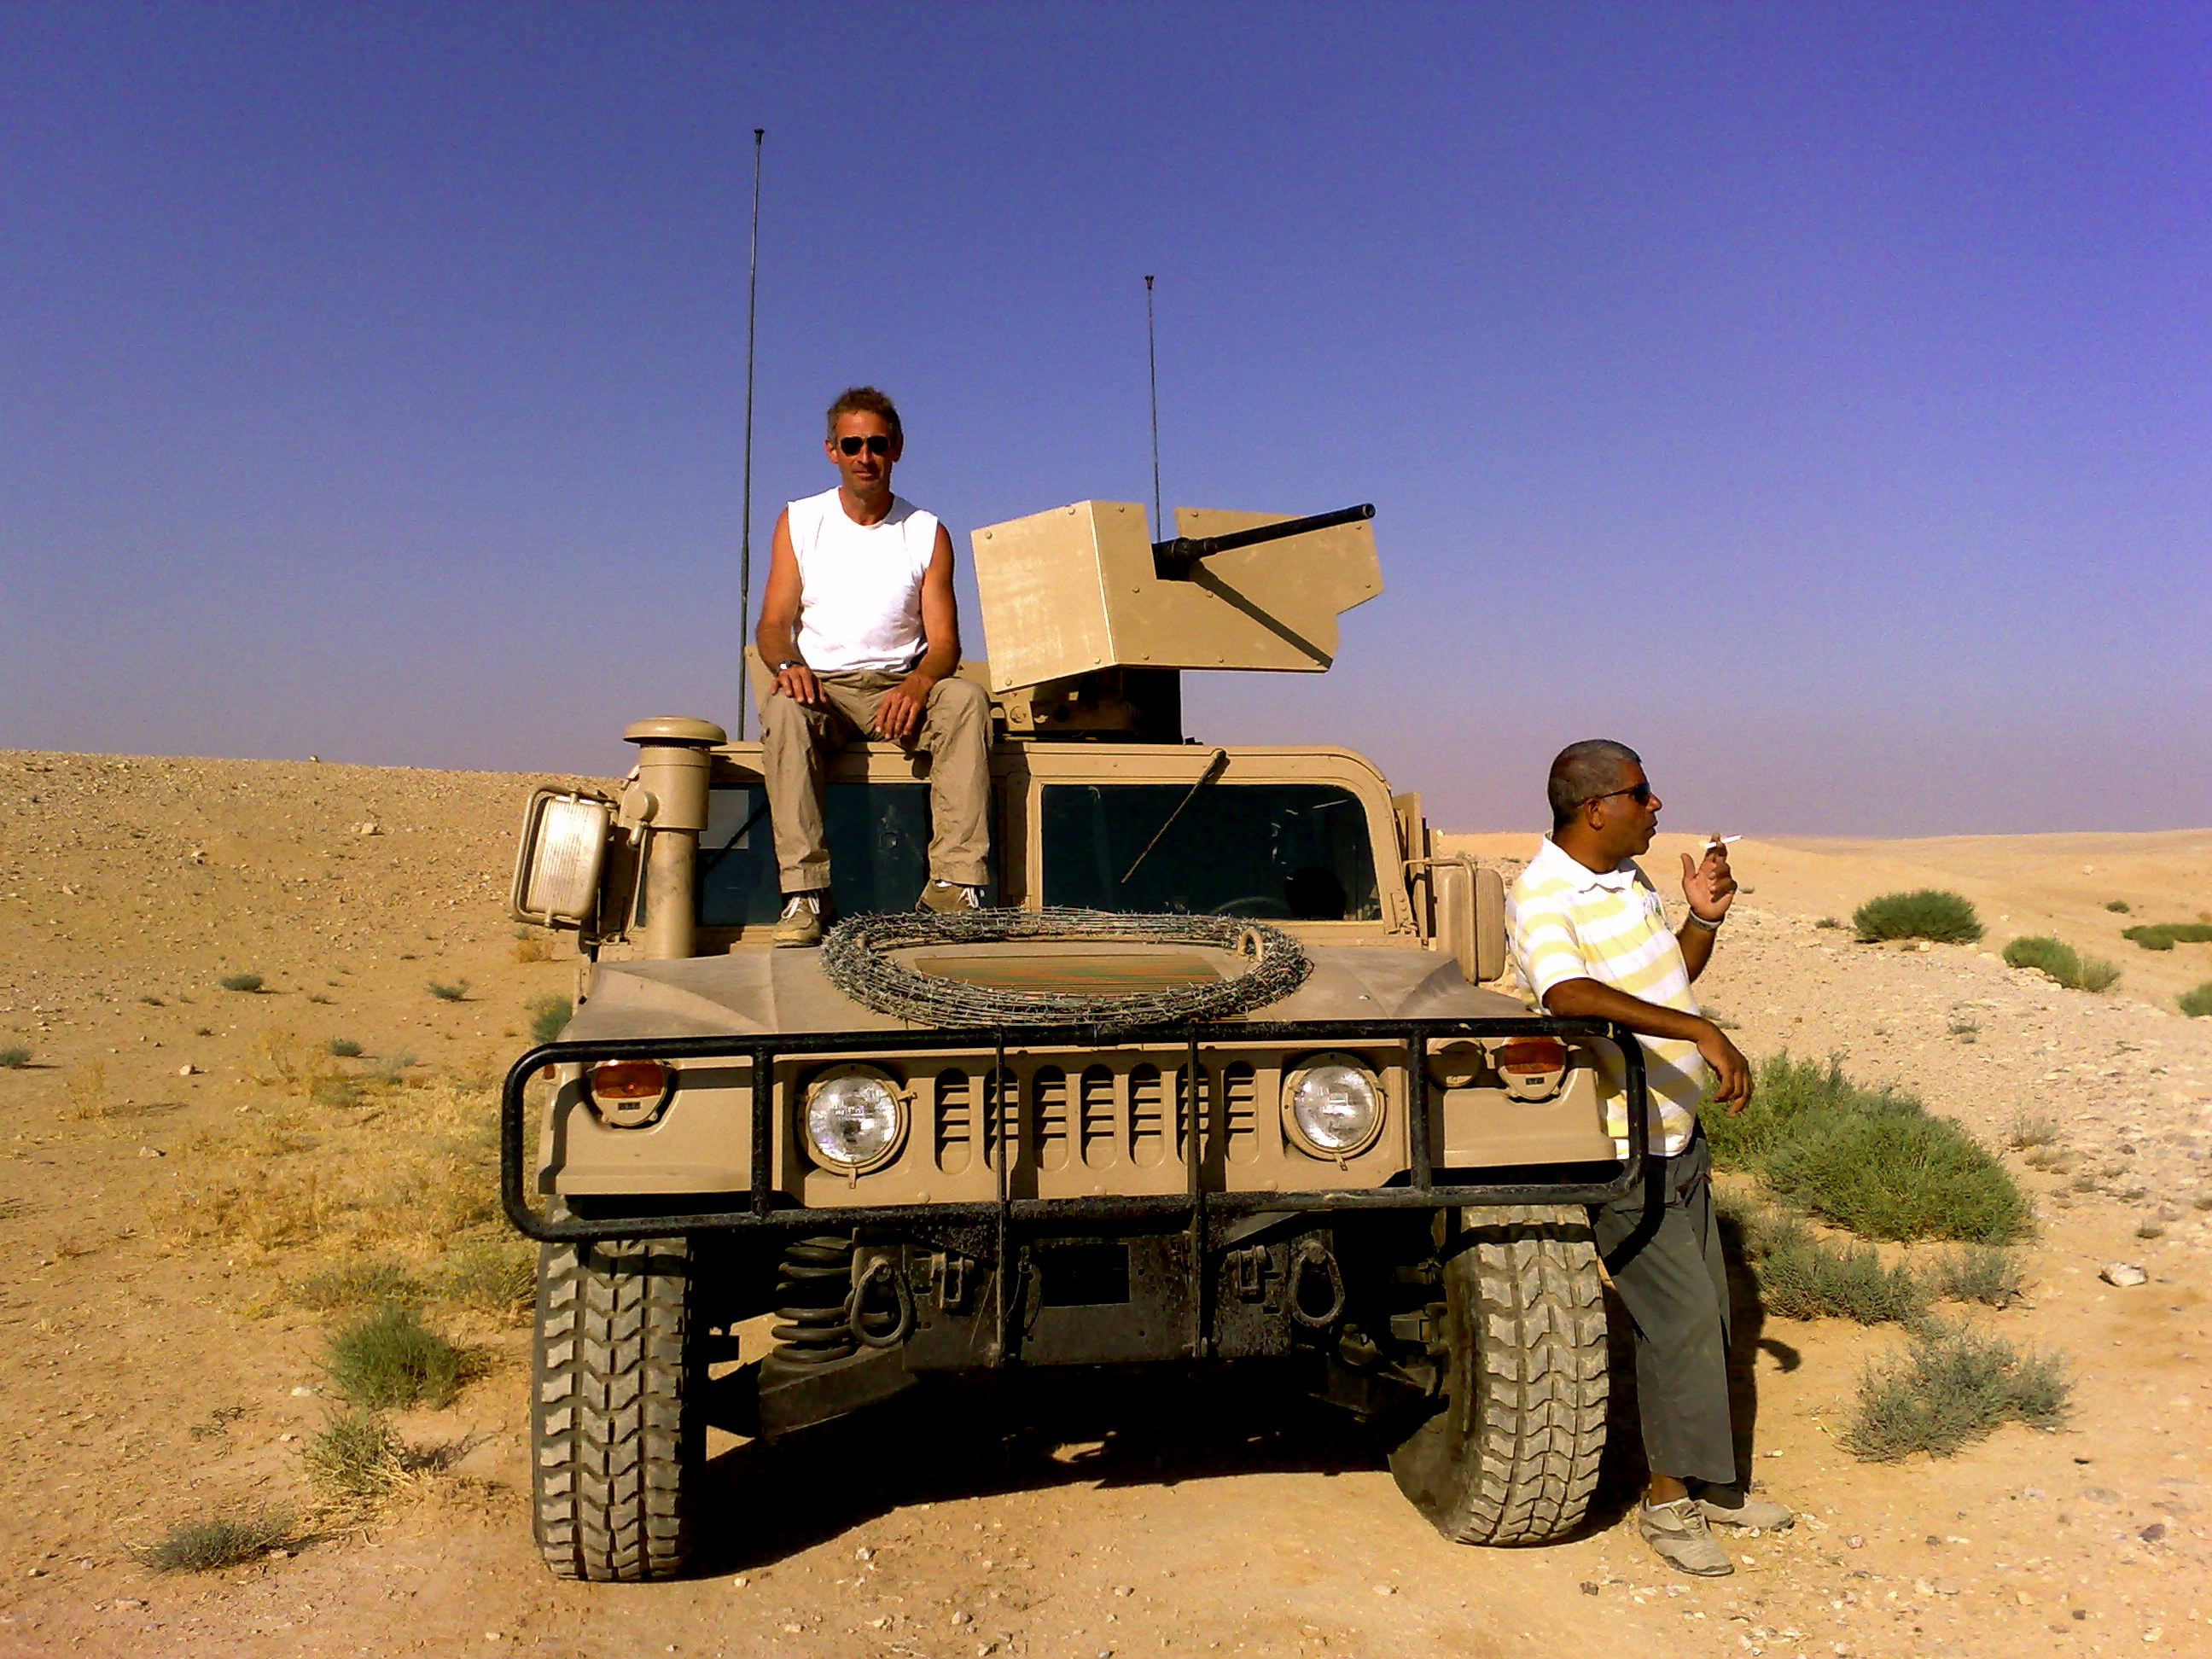 Latest project,currently filming in Jordan I'm on the roof